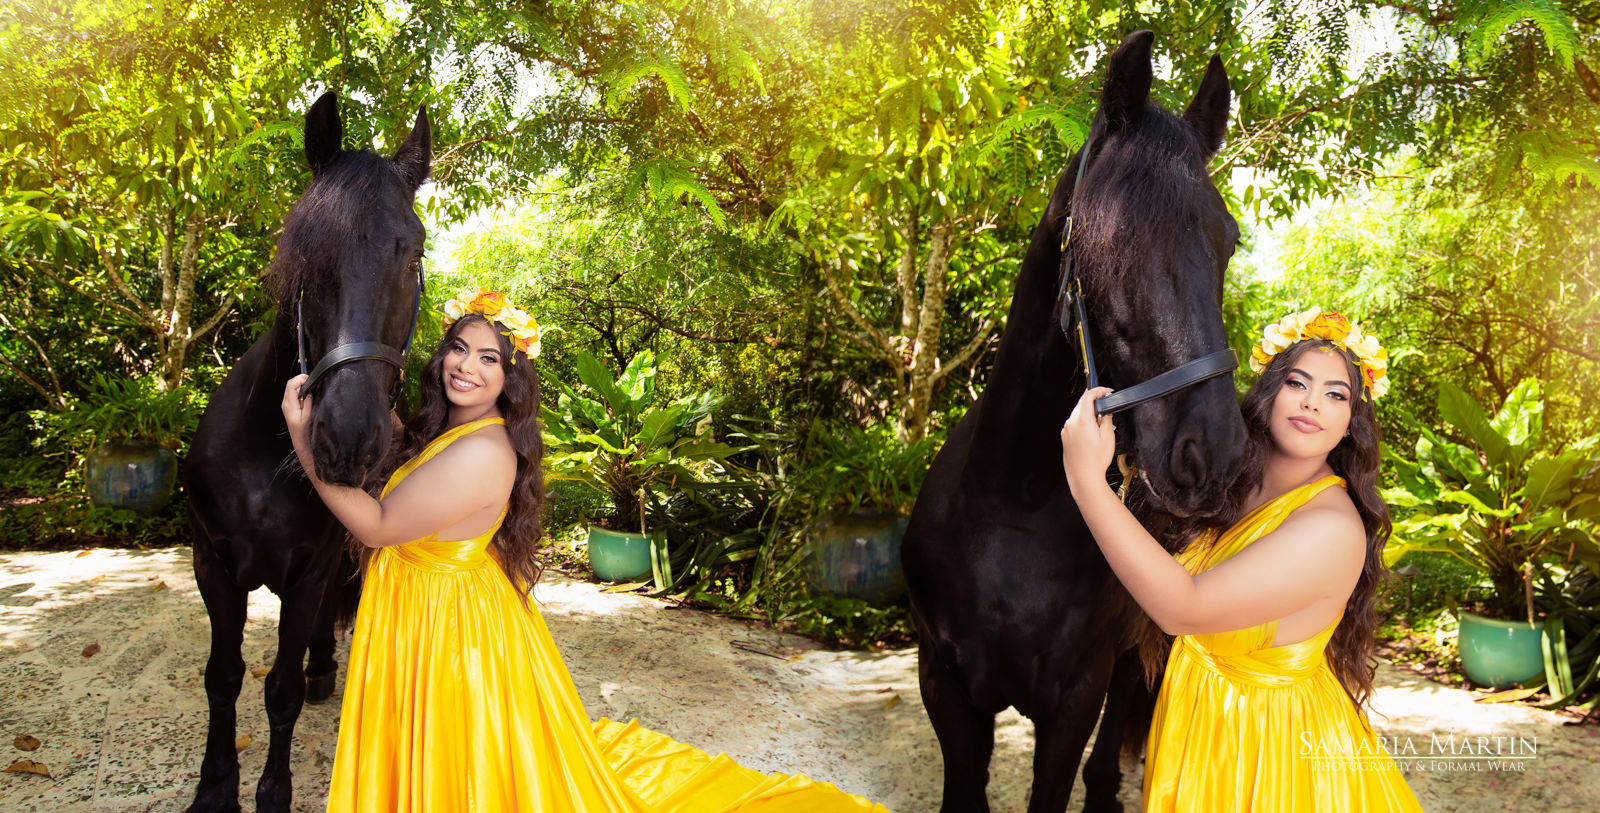 Photoshoot with horse, quinceaneras dresses, Miami dress rental, gown rental, quinceanera dress store